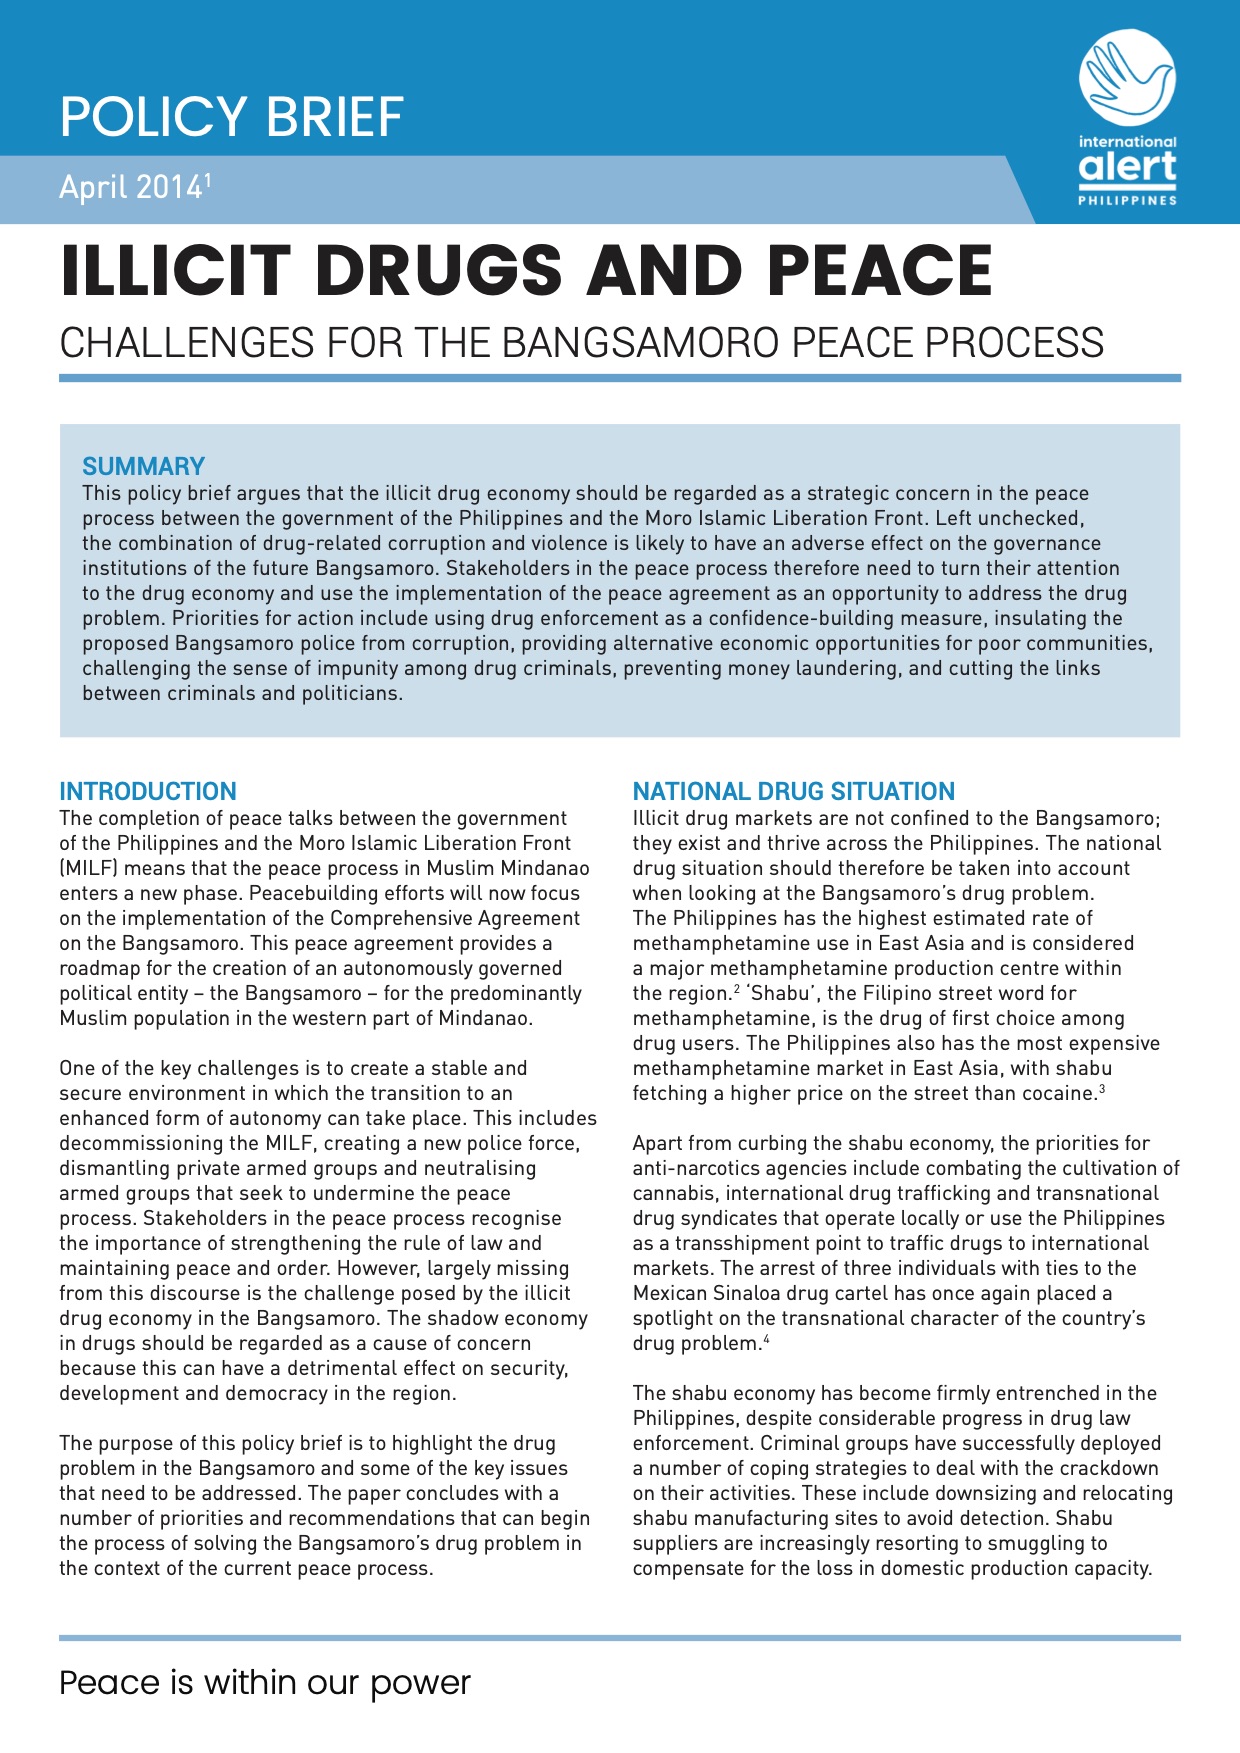 Illicit Drugs and Peace